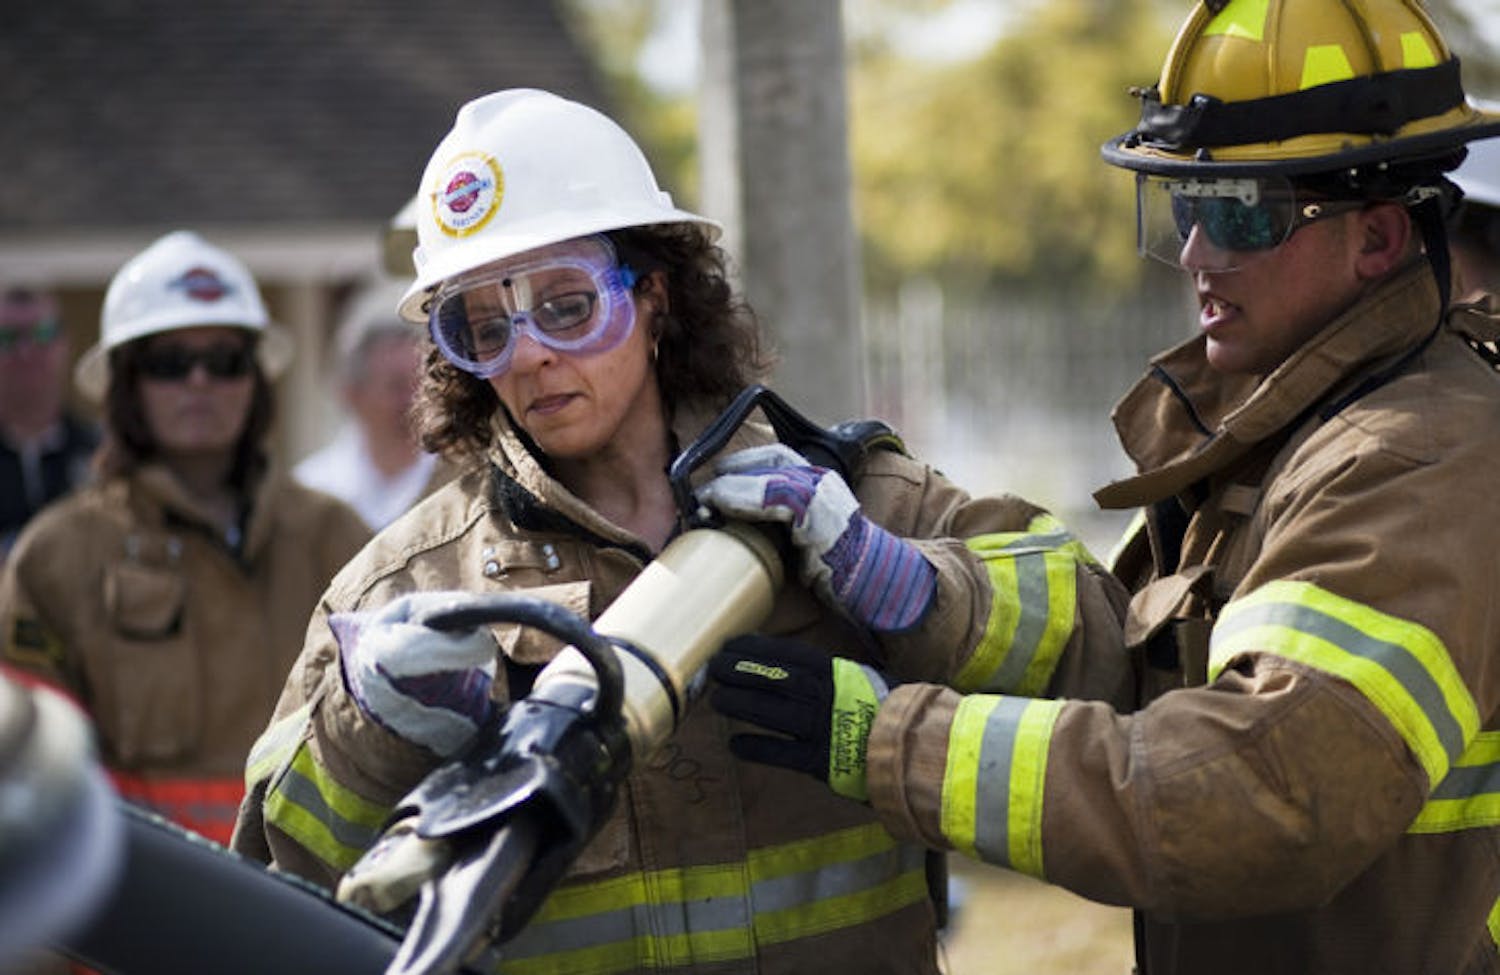 Firefighter Joey Gonzalez, right, teaches Odette Hinson, left, how to operate the Jaws of Life at the Second Annual Citizens Fire Academy held Saturday at the Gainesville Fire Rescue training facility.&nbsp;